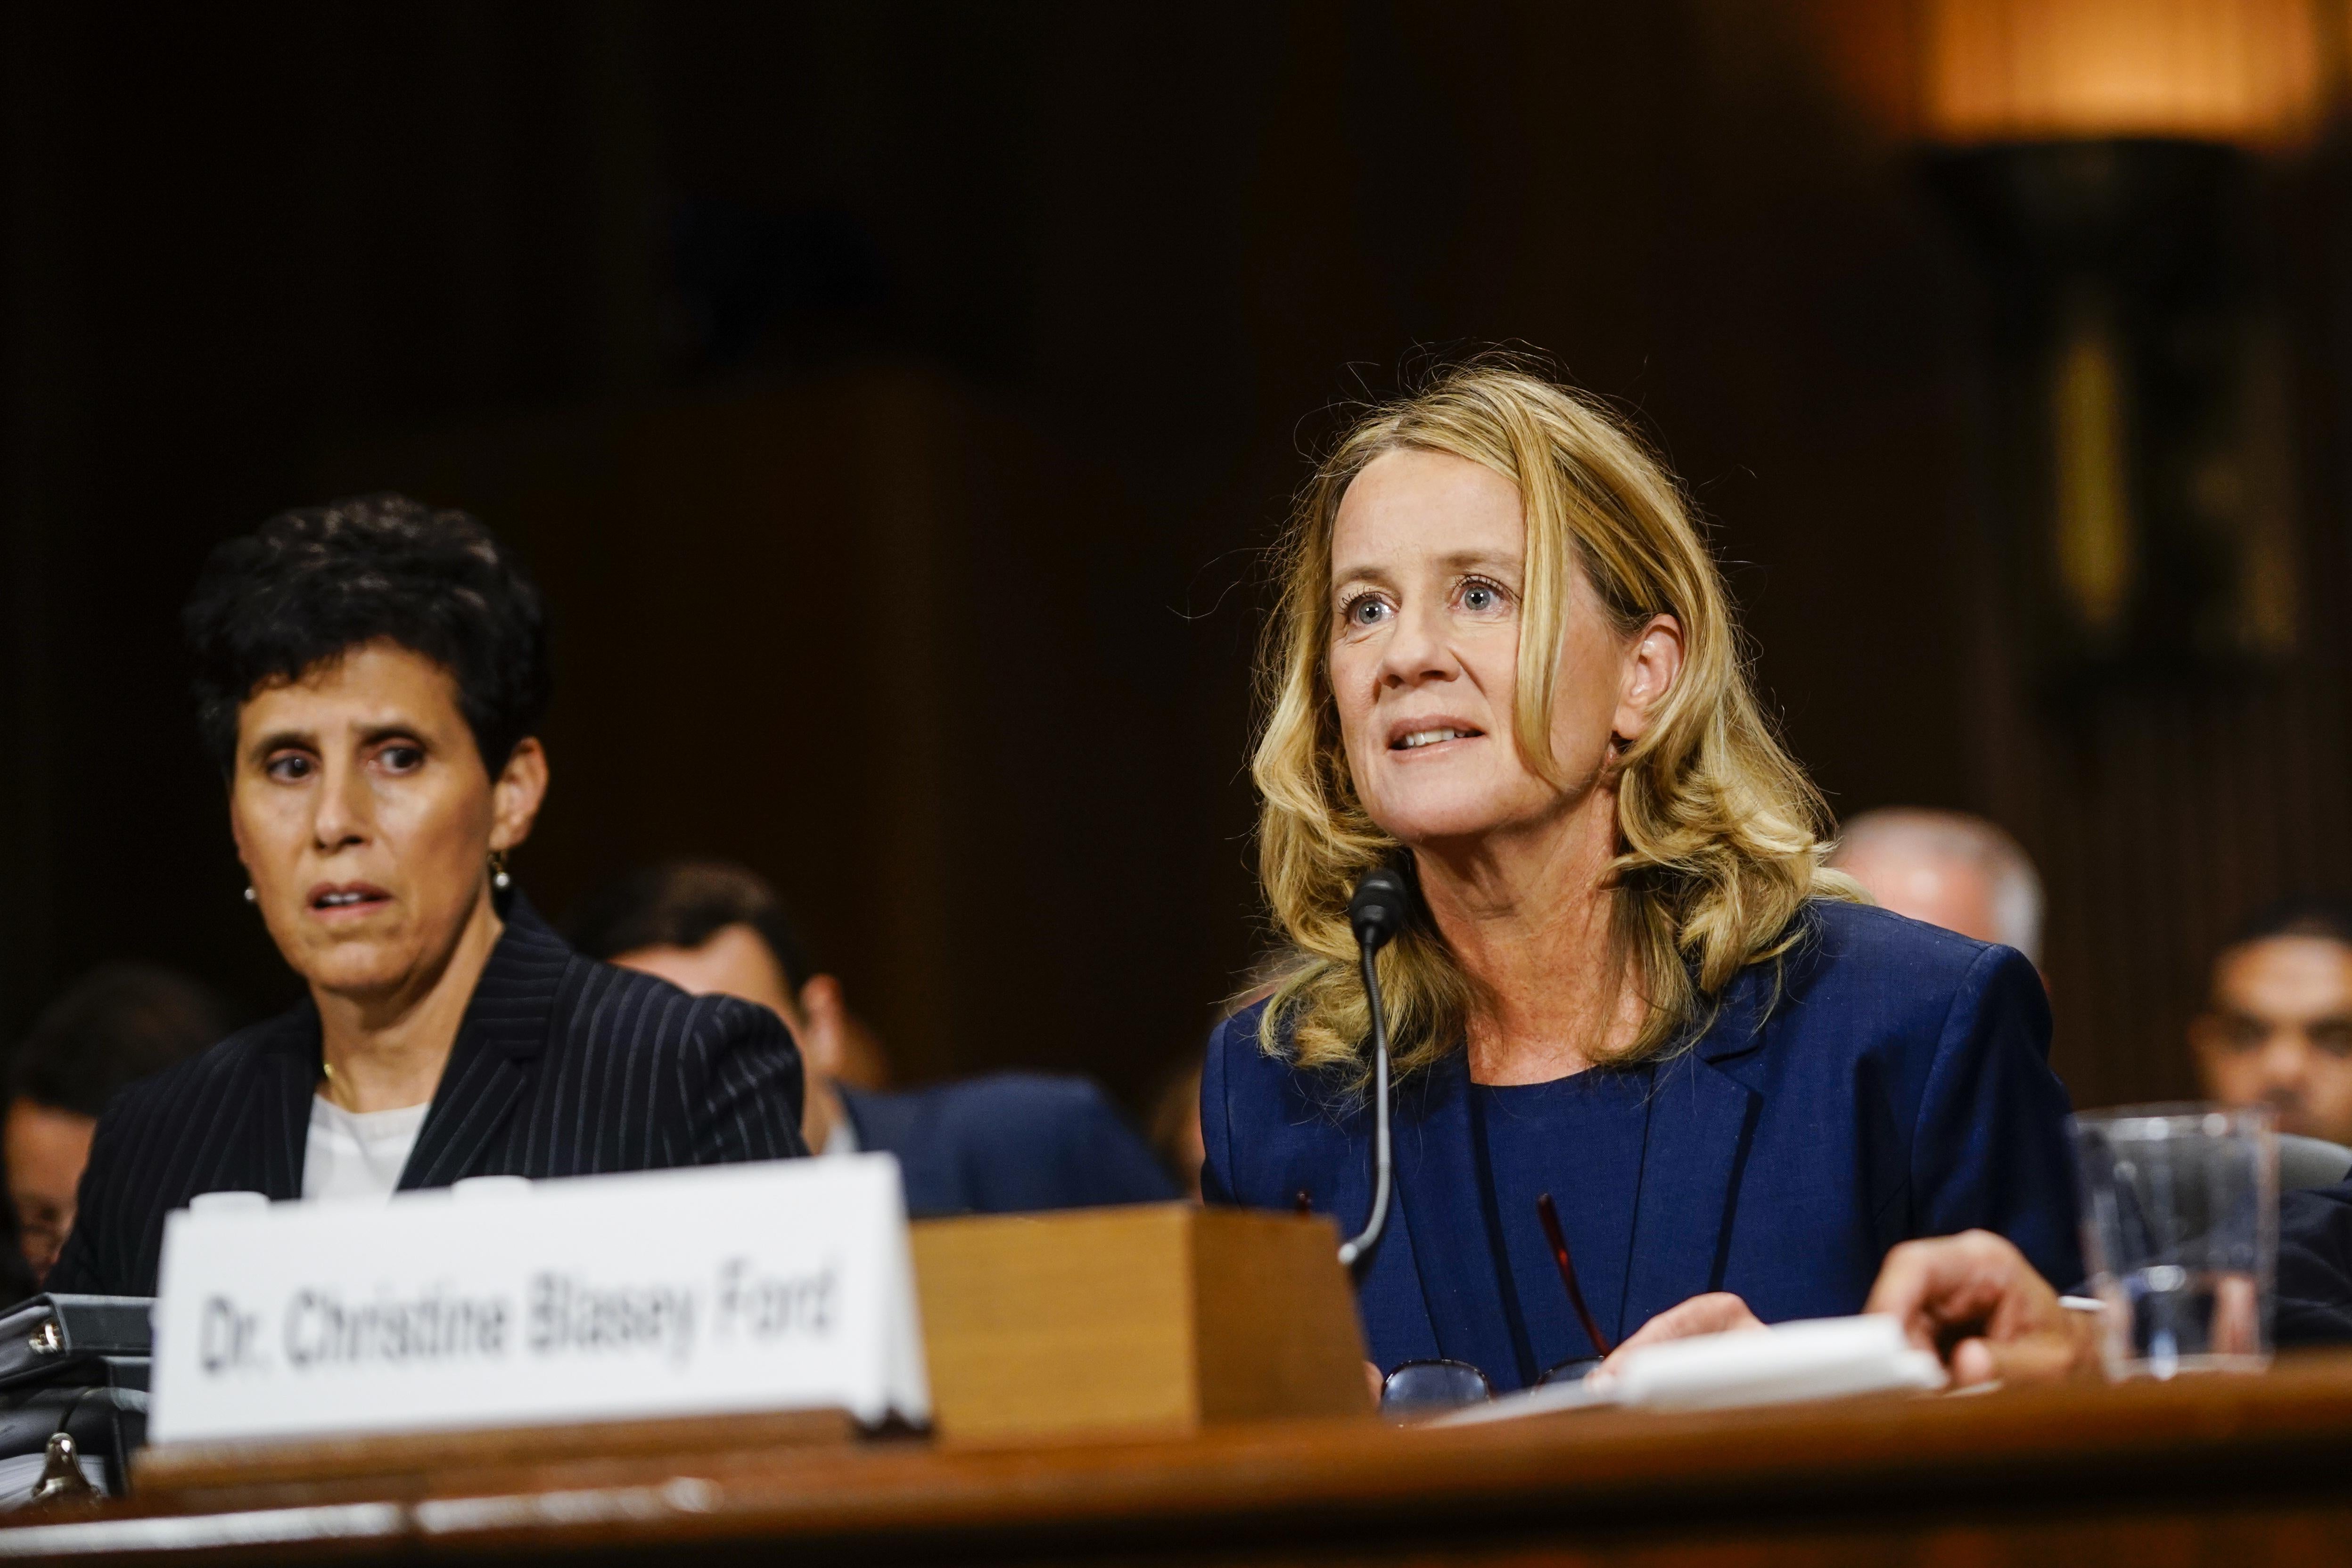 Christine Blasey Ford sits before the committee, appearing alert; her lawyer, Debra Katz, sits nearby